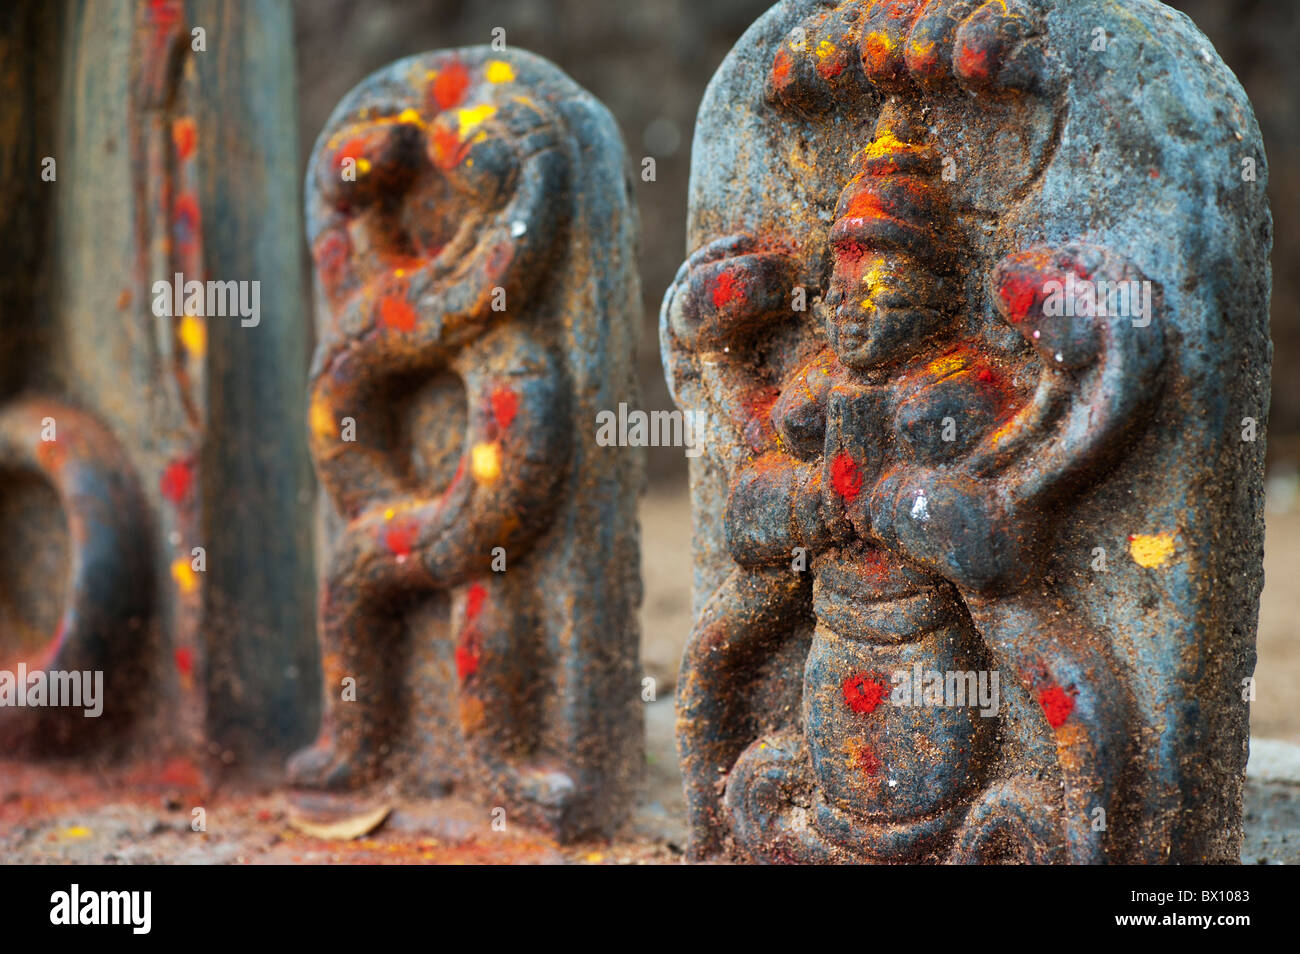 Hindu altar stones at a temple depicting Indian vishnu deity in the south indian countryside. Andhra Pradesh, India. Stock Photo